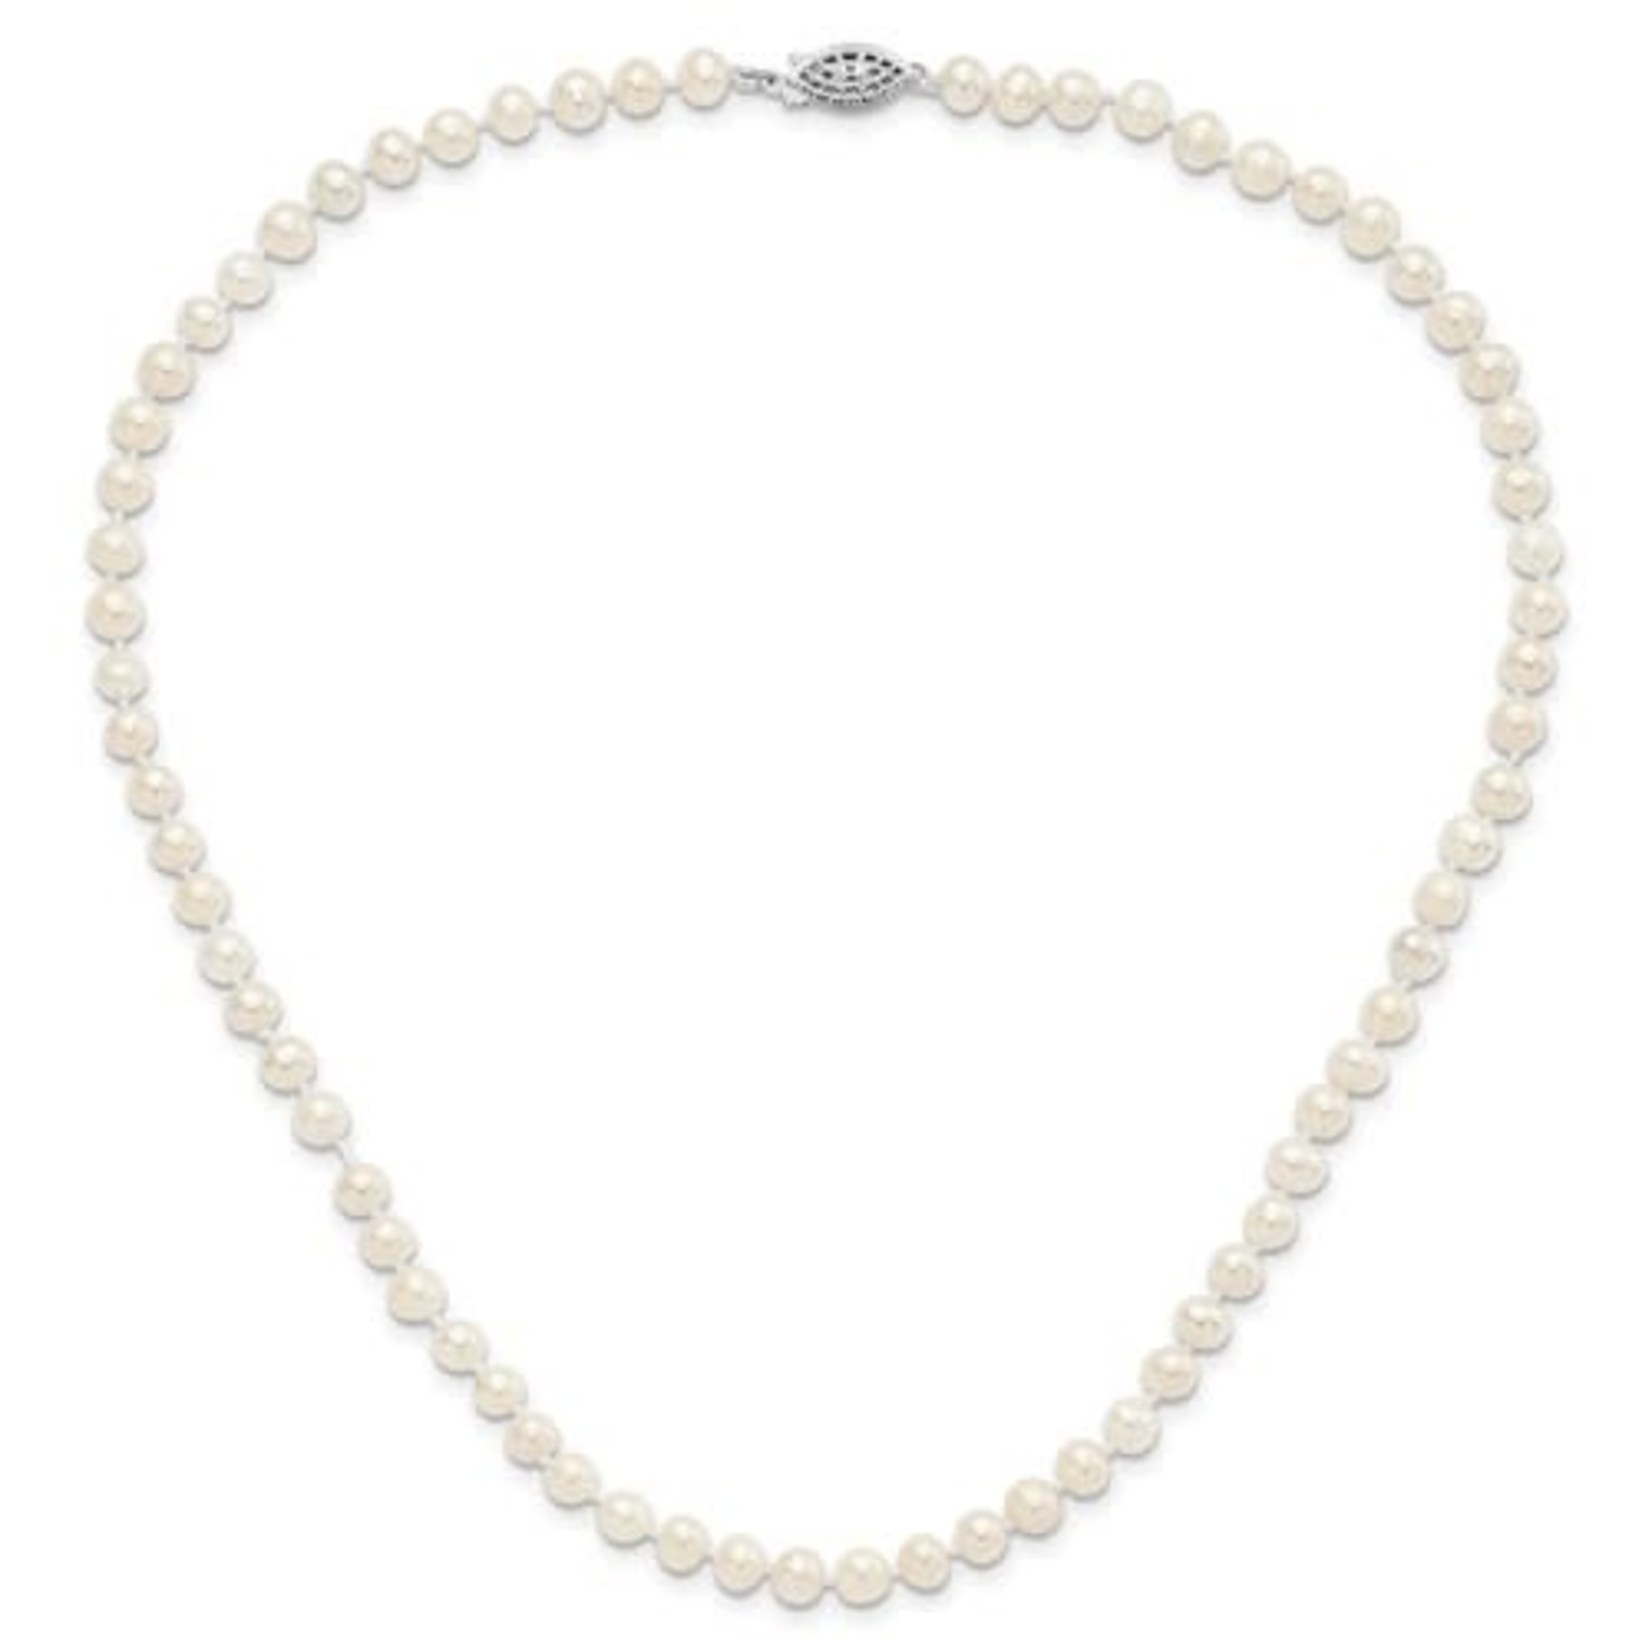 This Is Life White Freshwater Cultured Pearl Necklace - 18" - 5-6mm